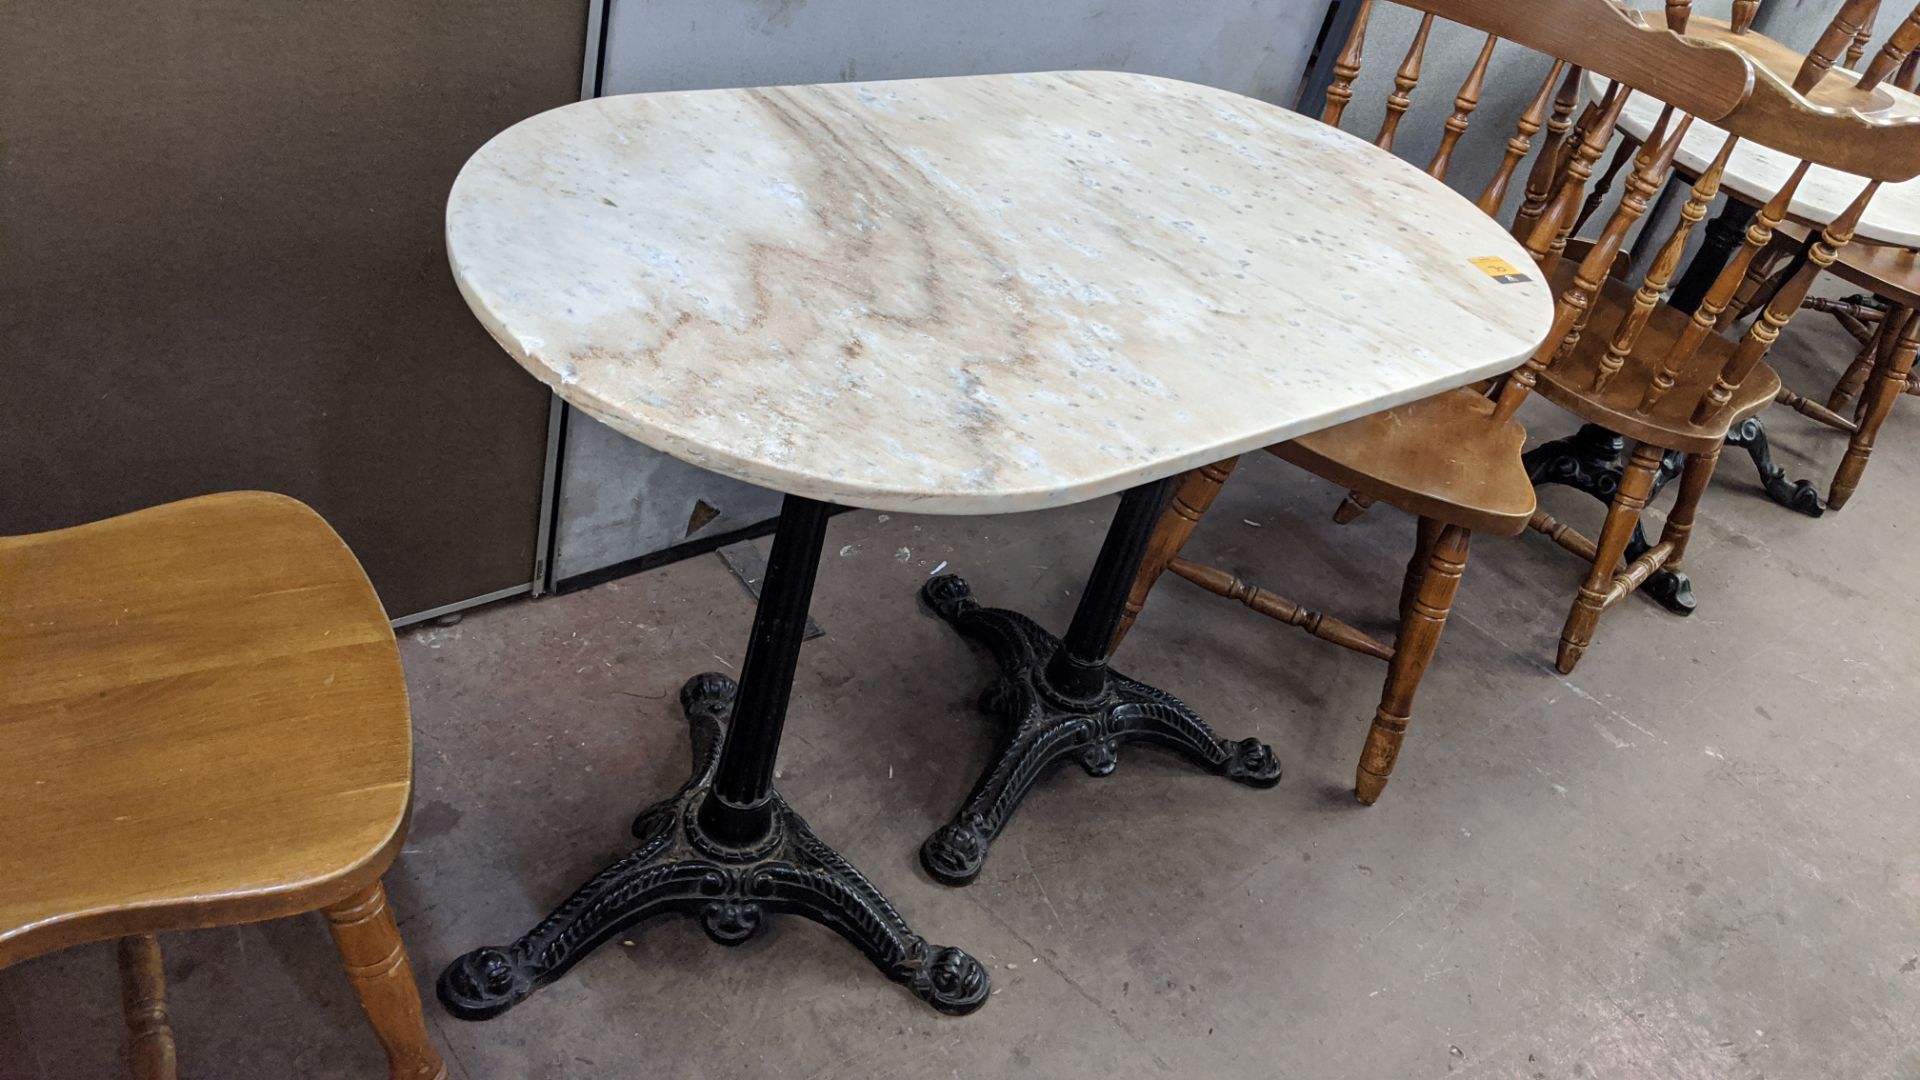 4 off oval dining/café tables, each comprising a heavy-duty marble or equivalent top & 2 off heavy-d - Image 3 of 6